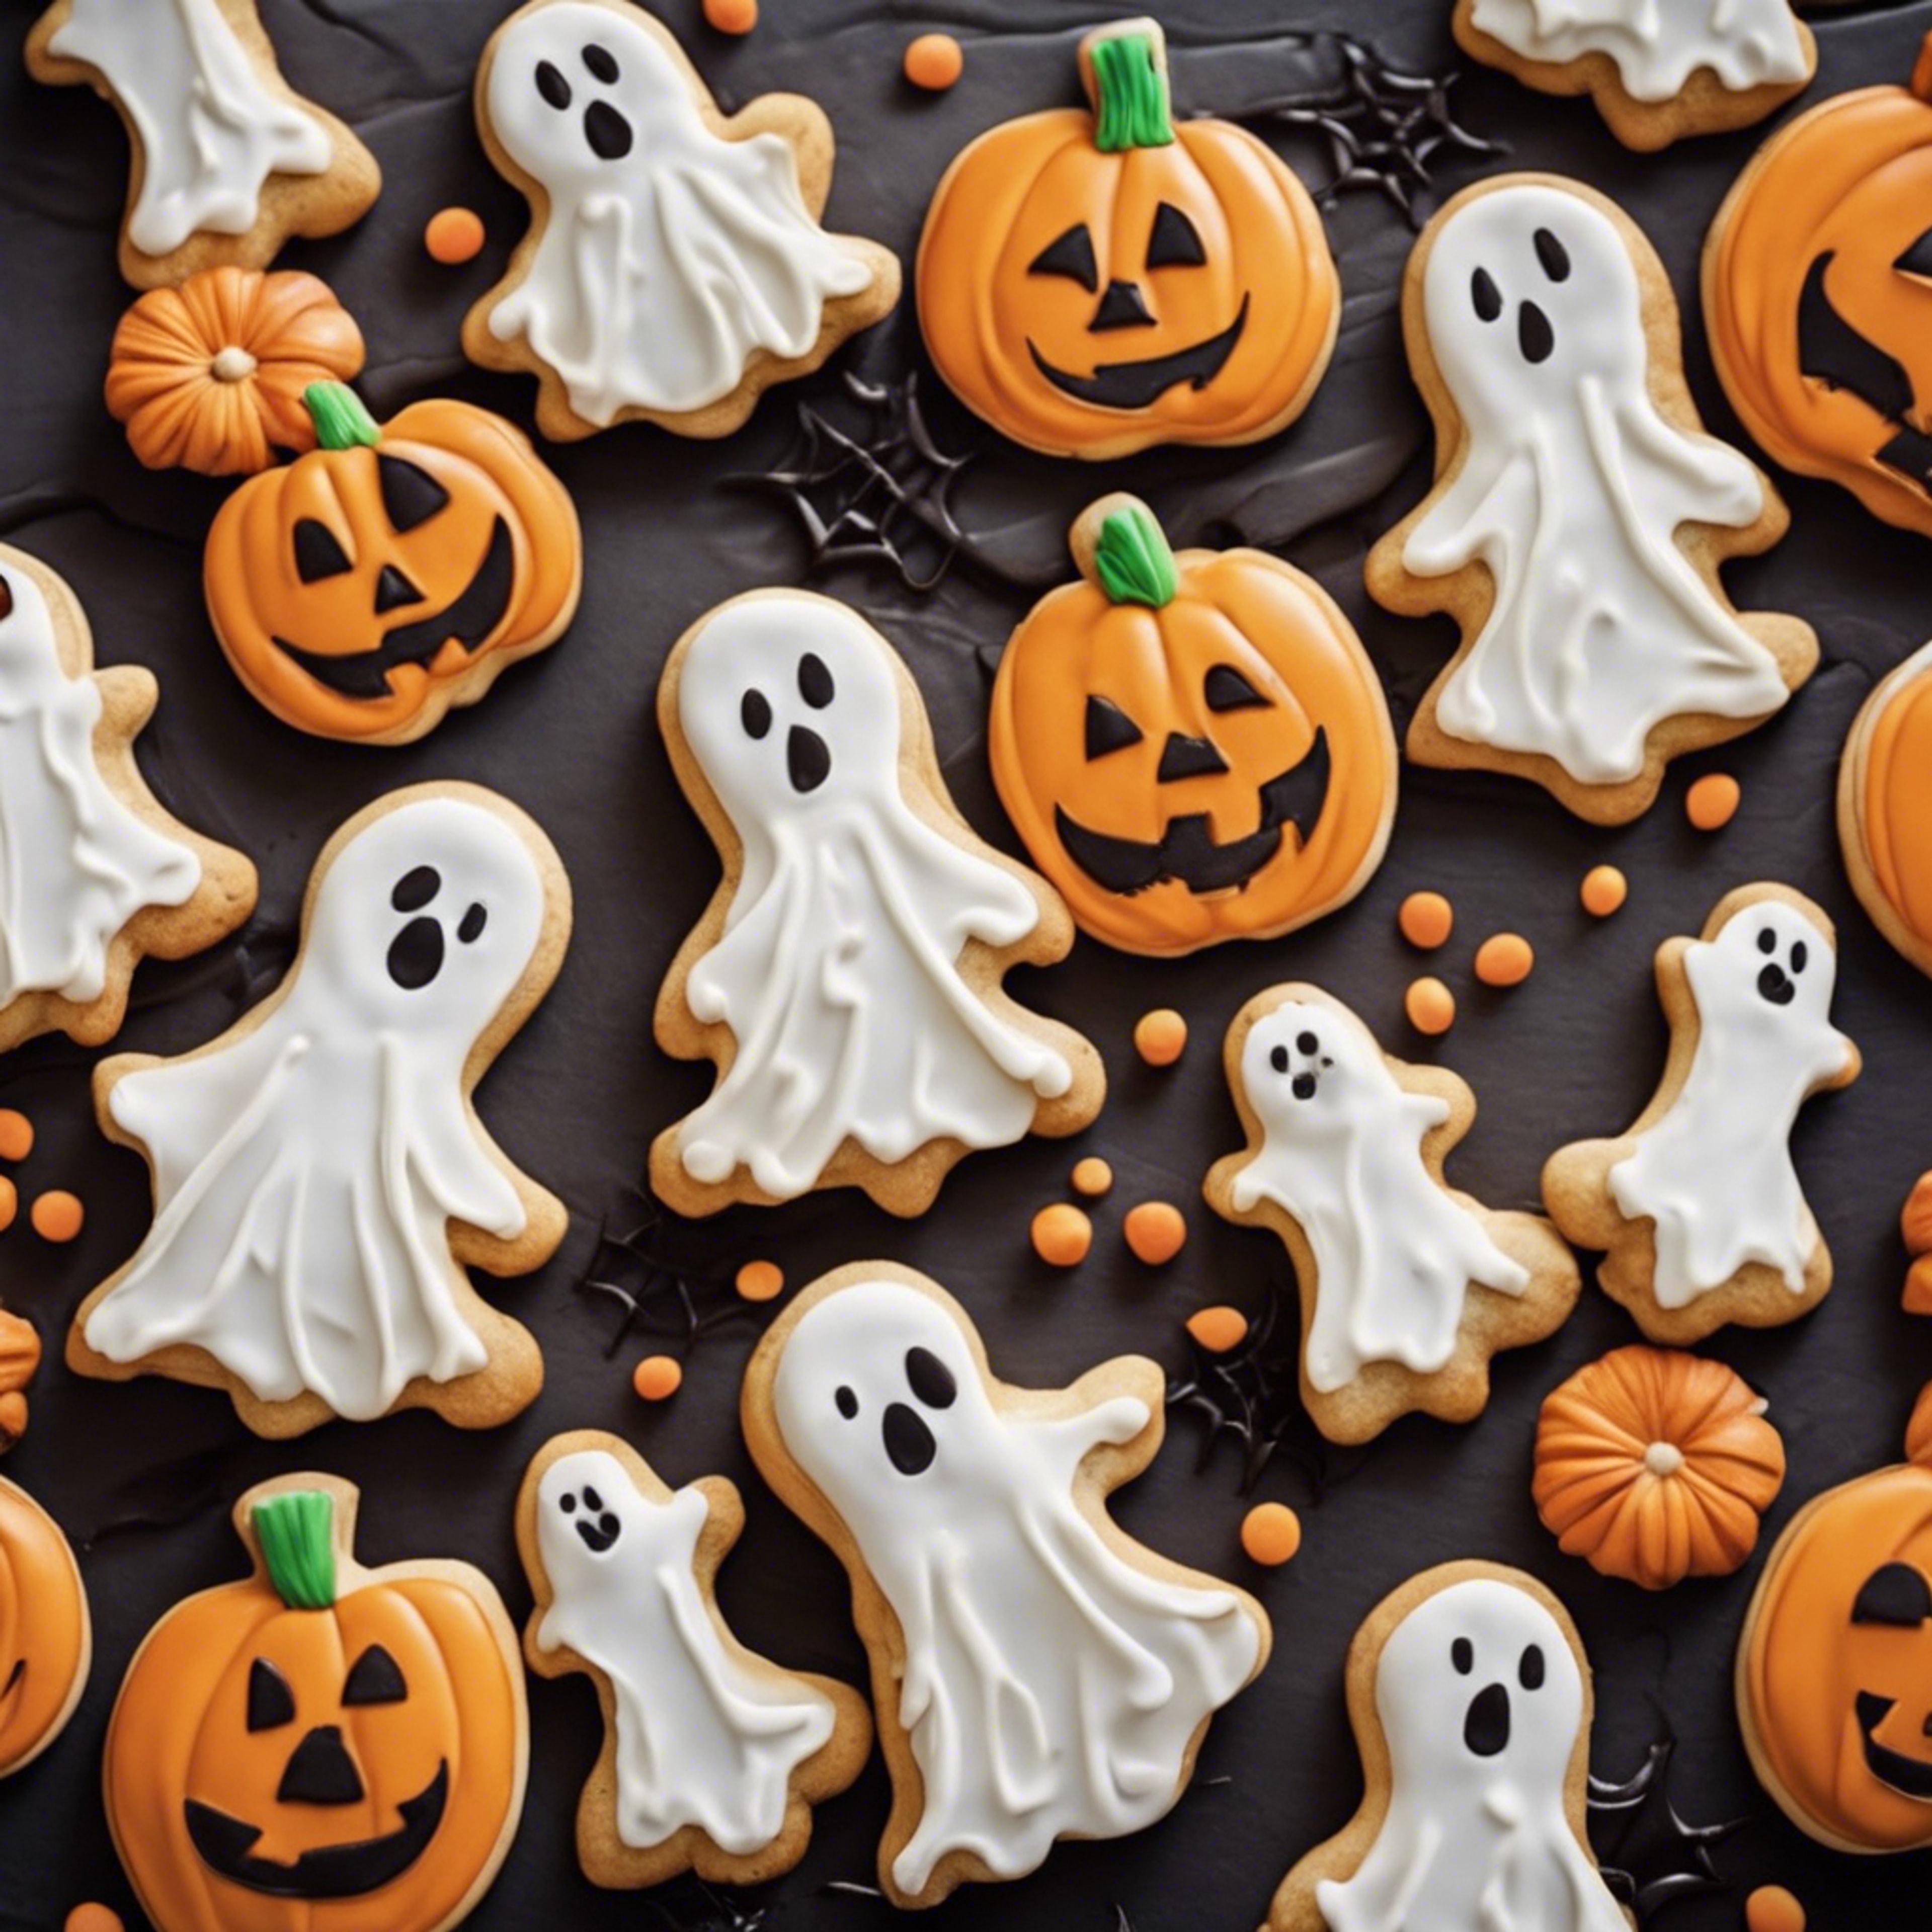 A bakery with a Halloween theme, featuring cookies shaped like ghosts and pumpkins. Обои[da61718461044d51ad06]